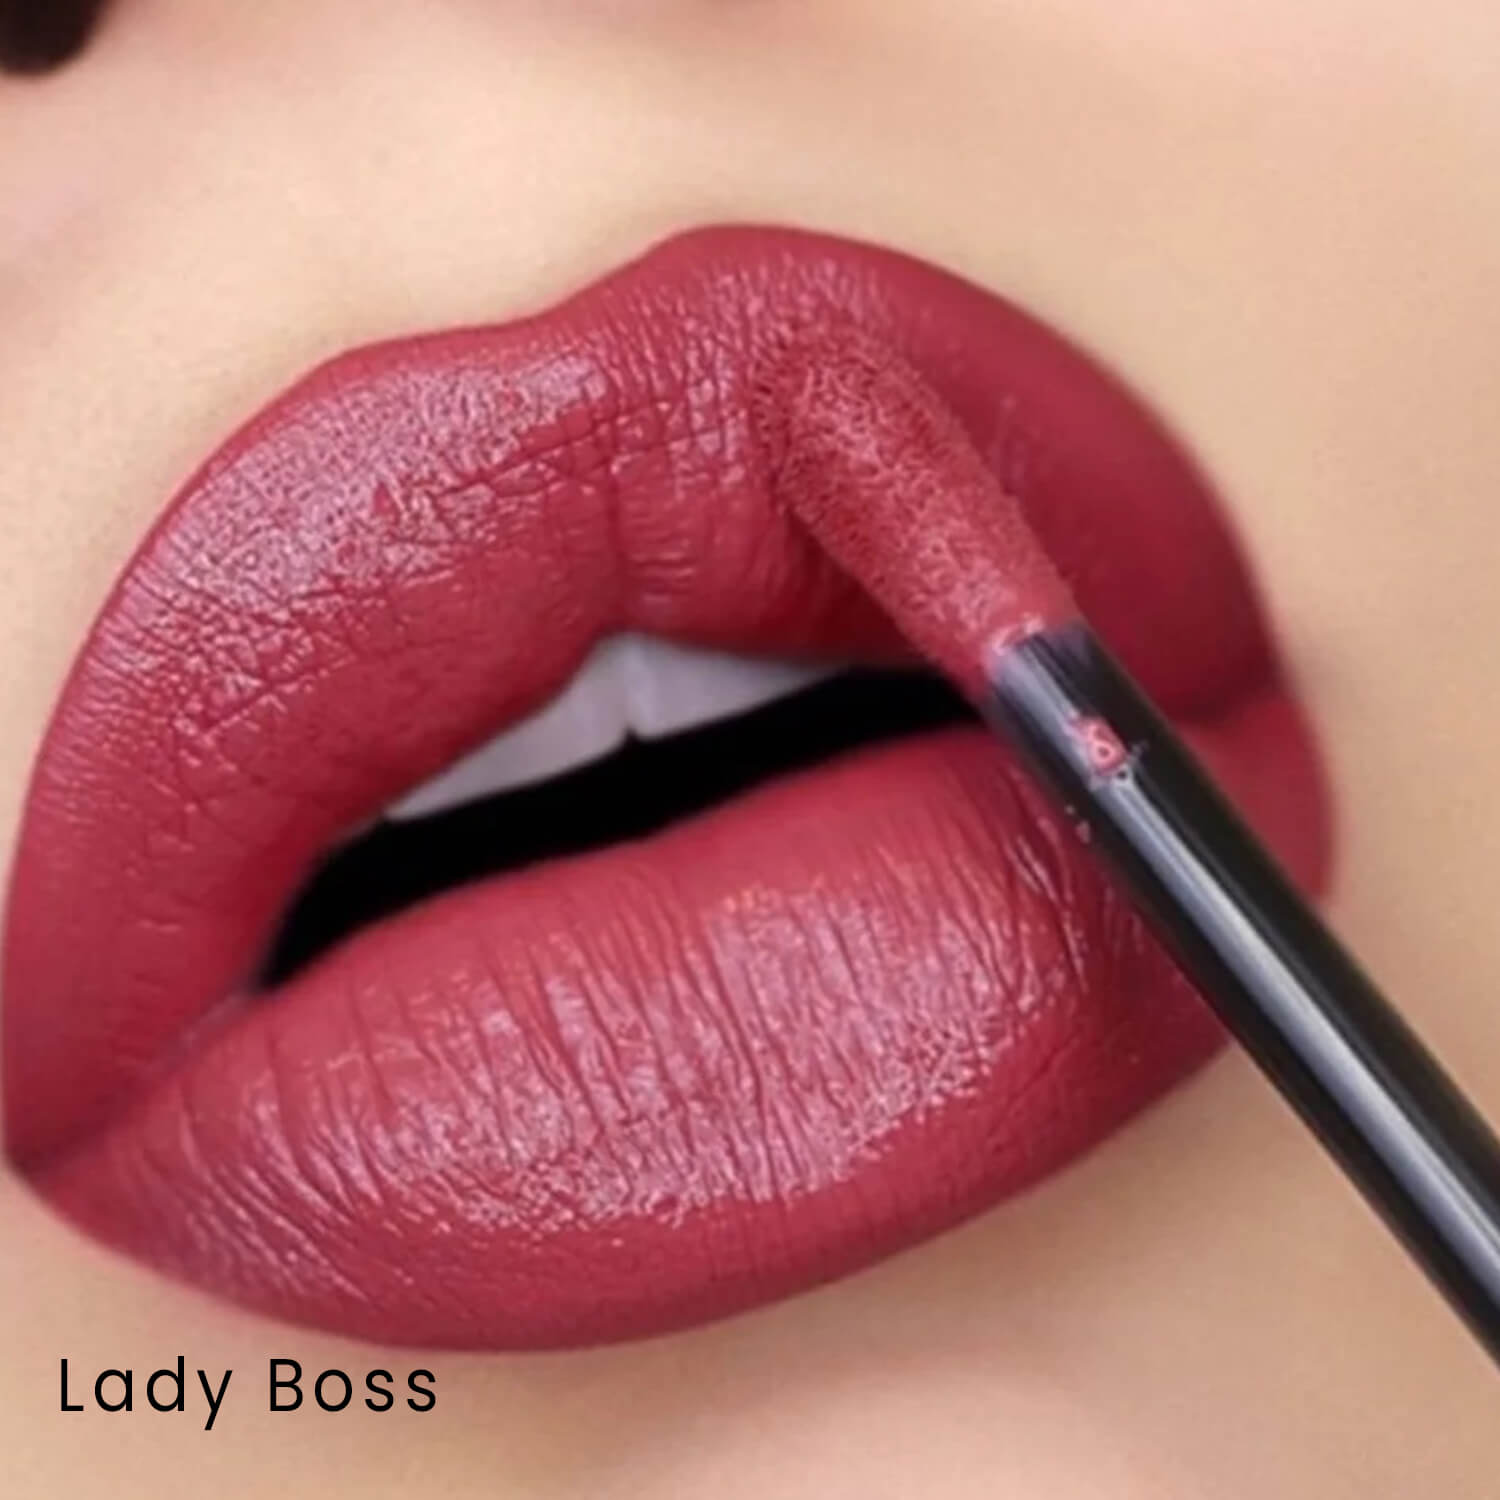 Shop Huda Beauty Demi Matte Cream Liquid Lipstick in Lady boss shade for her available at Heygirl.pk for delivery in Karachi, Lahore, Islamabad across Pakistan.